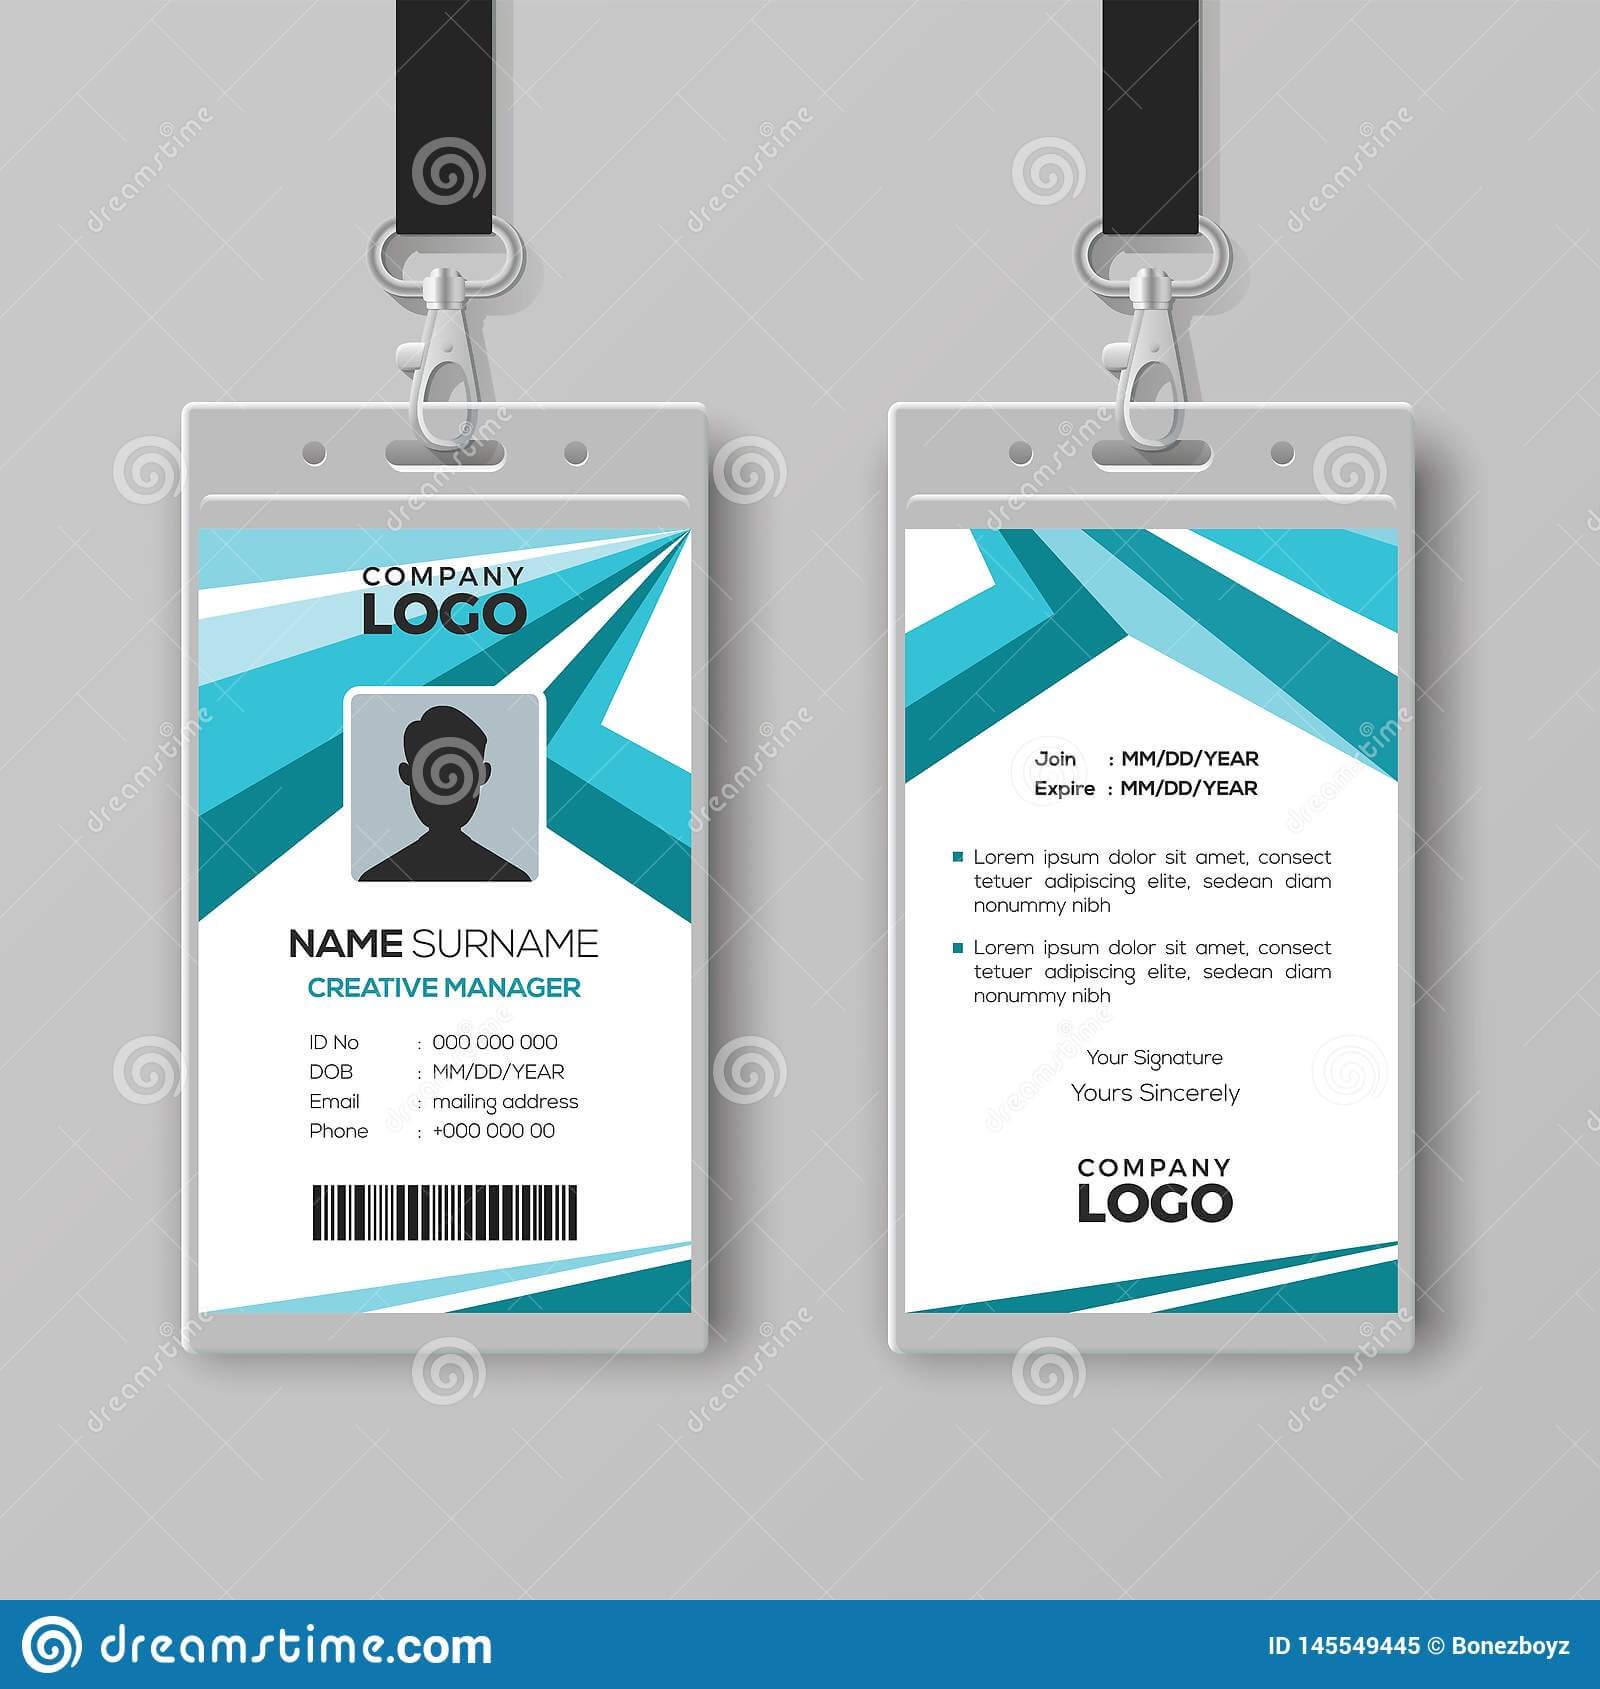 Abstract Corporate Id Card Design Template Stock Vector With Conference Id Card Template